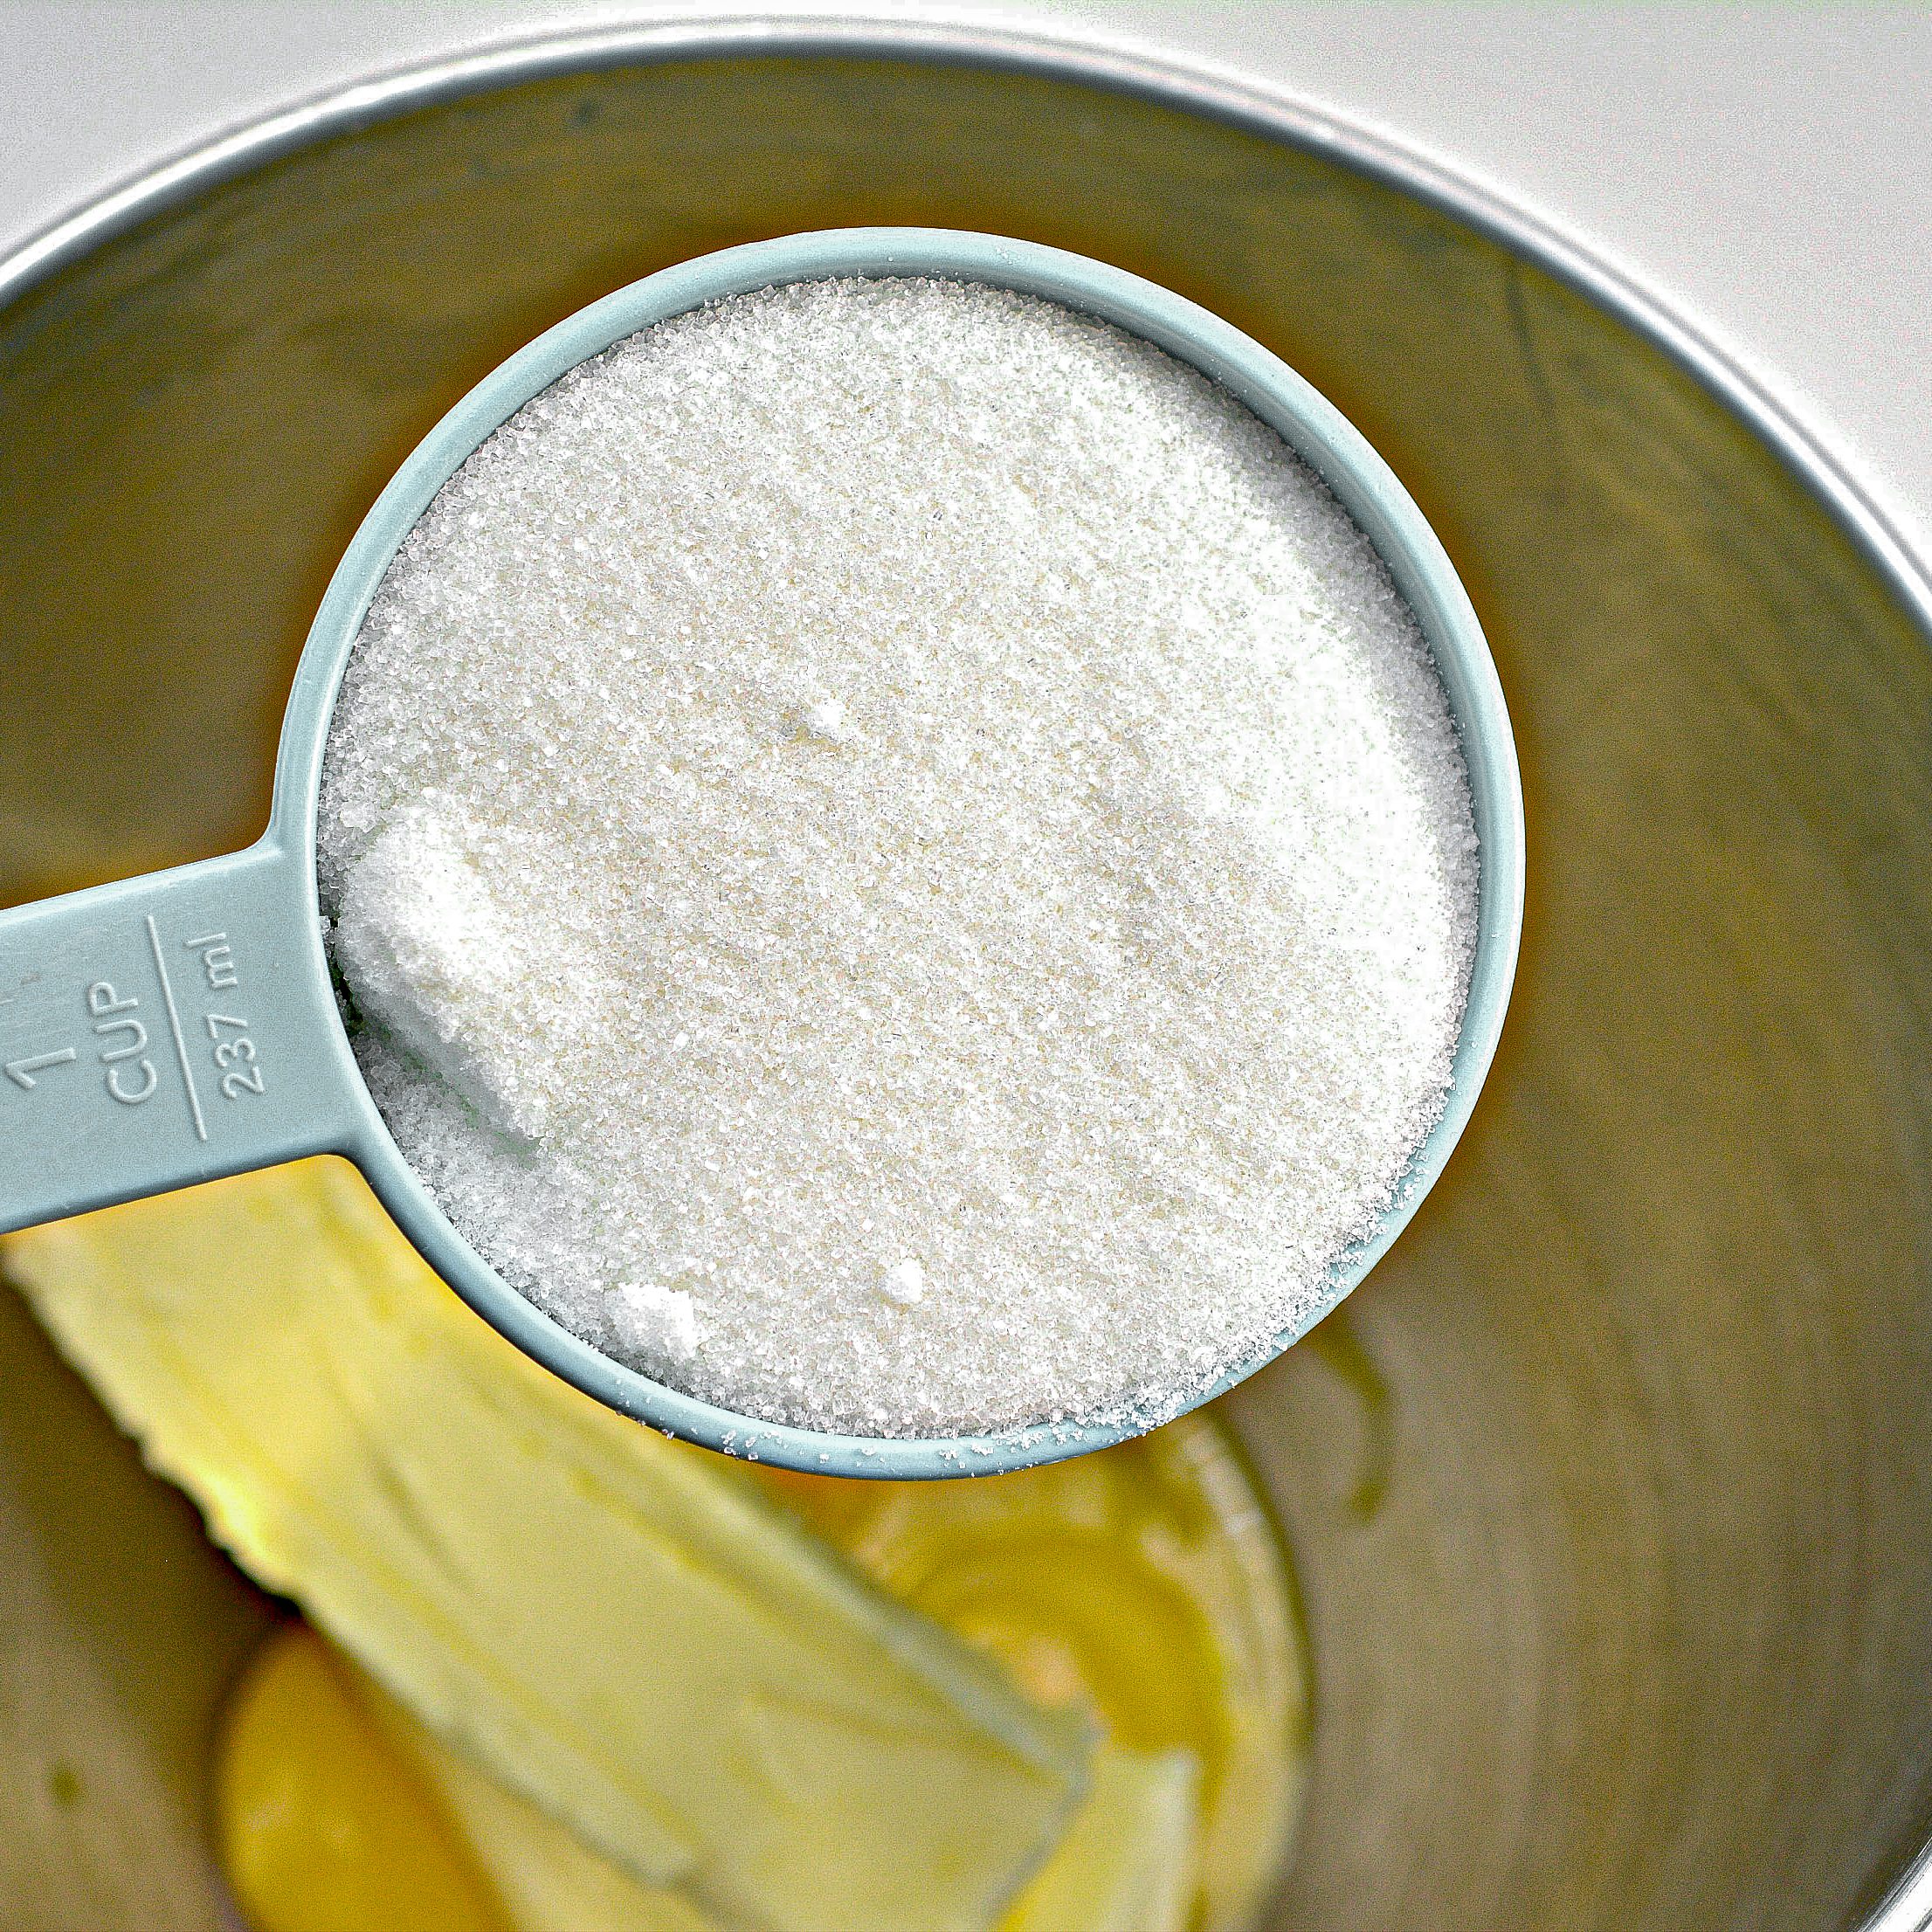 In a mixing bowl, beat together the 1 cup butter, 1 ¾ cup sugar, and egg yolks until well combined.